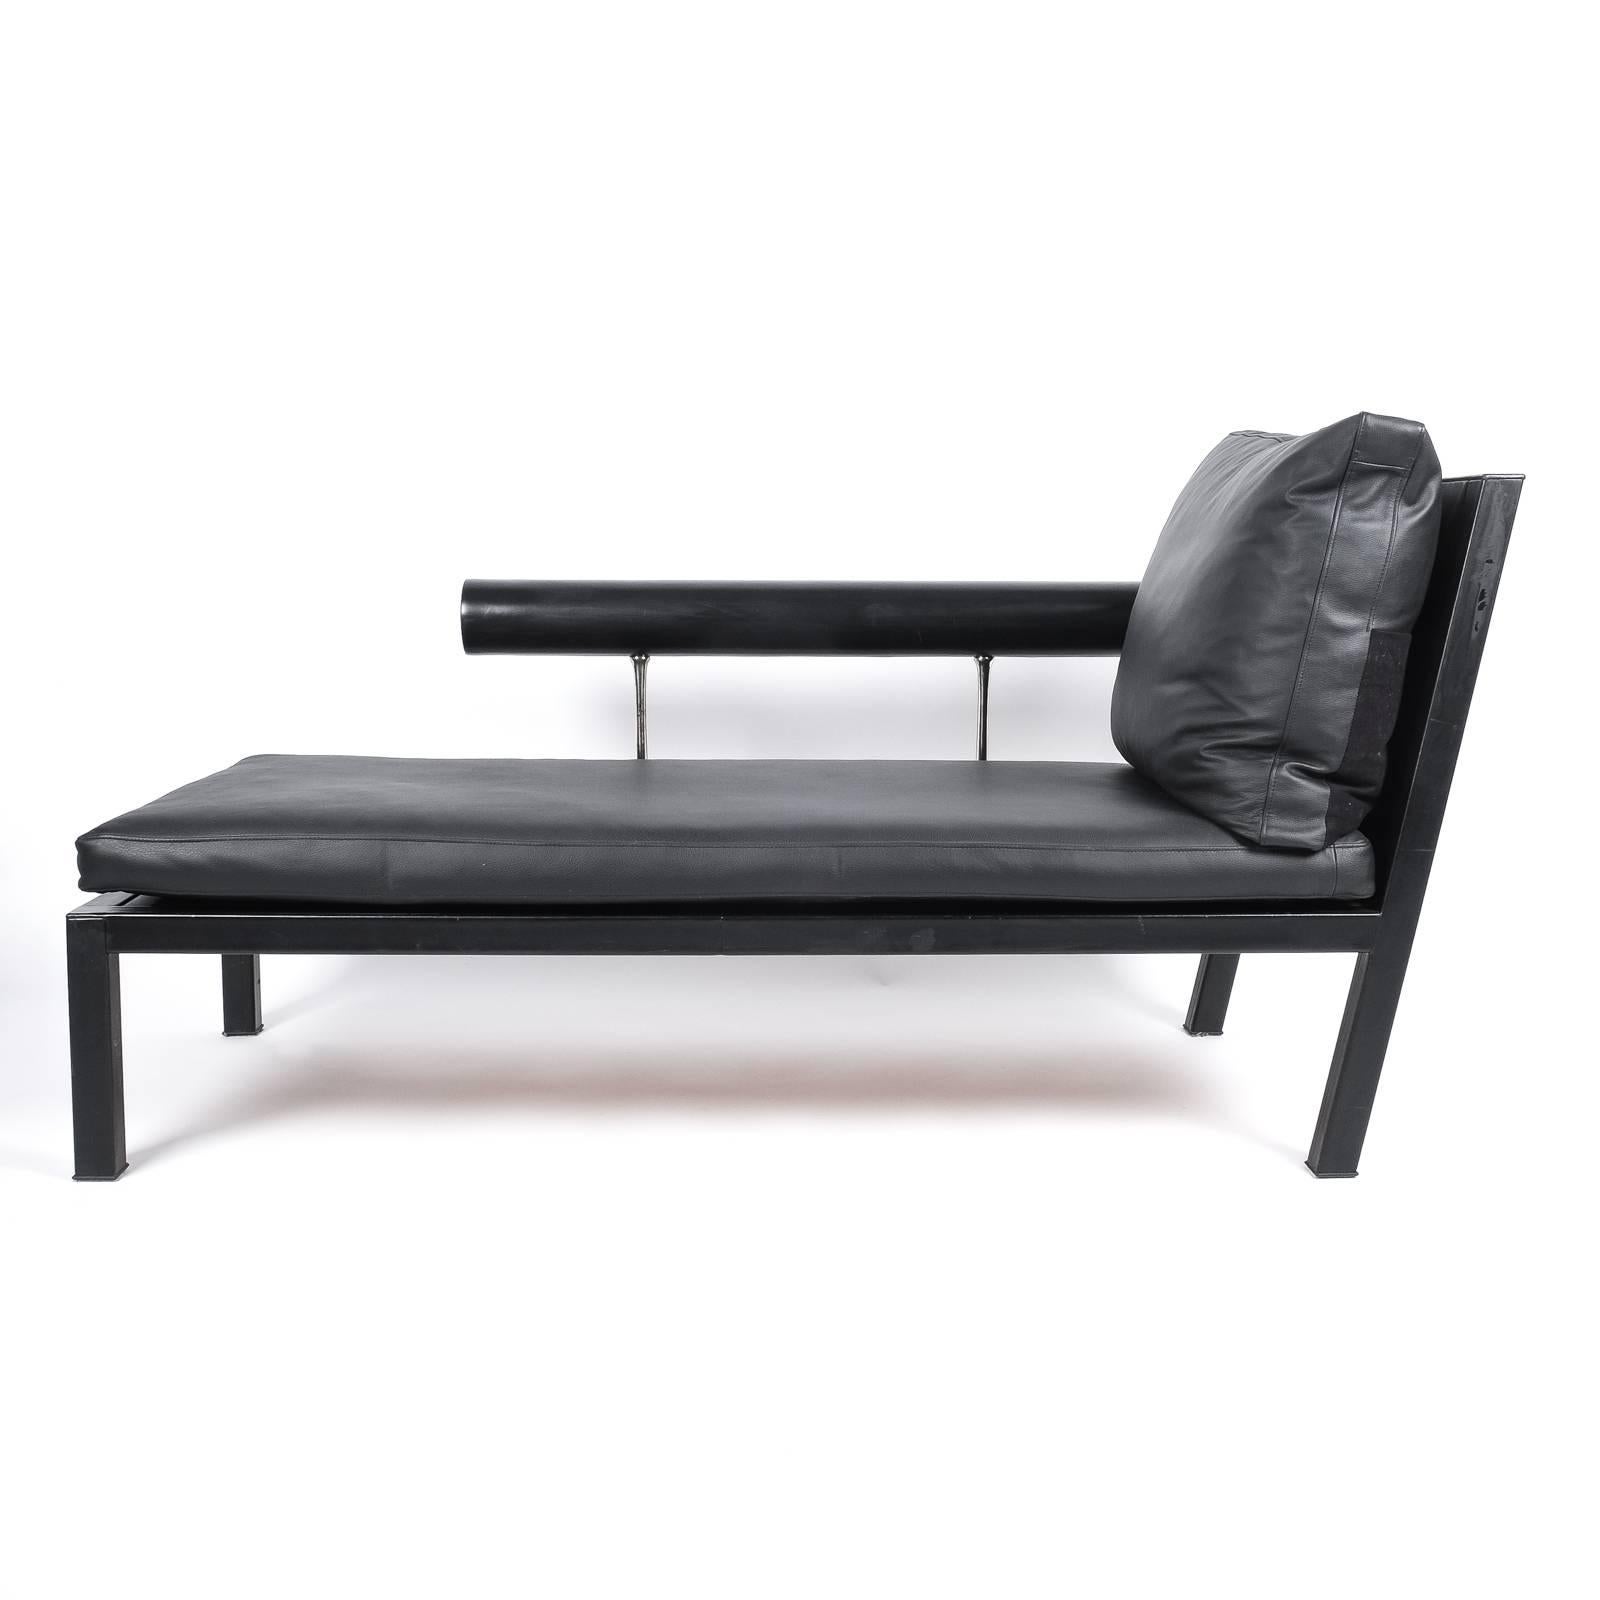 Leather Chaise Lounge Black Sofa Baisity by Antonio Citterio for B&B Italy, 1980 For Sale 5